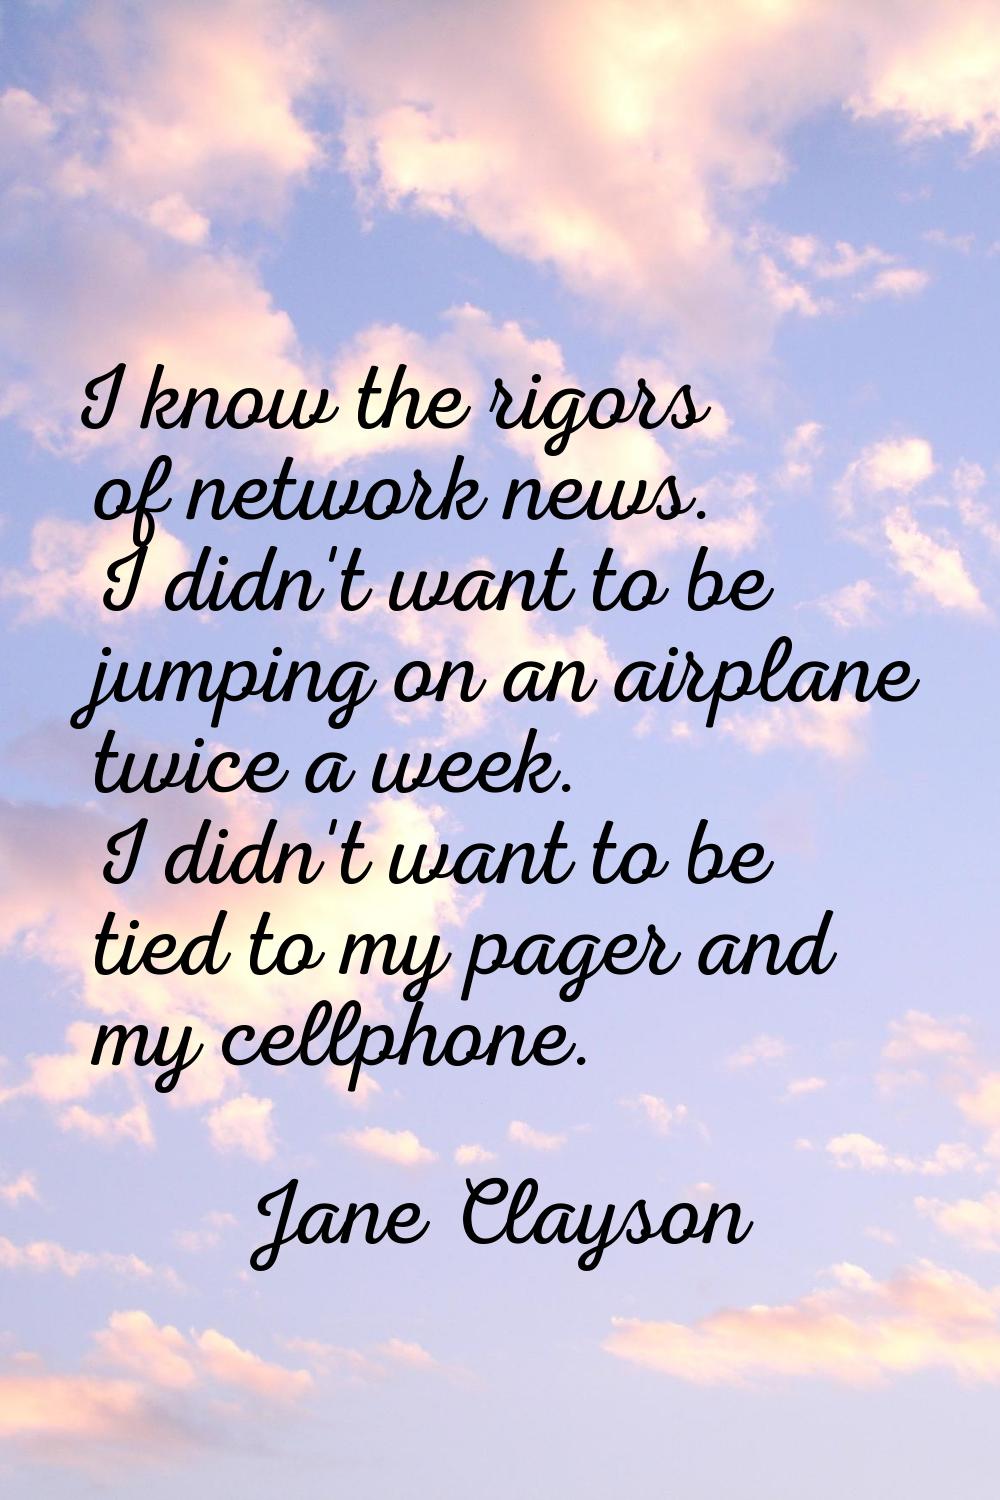 I know the rigors of network news. I didn't want to be jumping on an airplane twice a week. I didn'